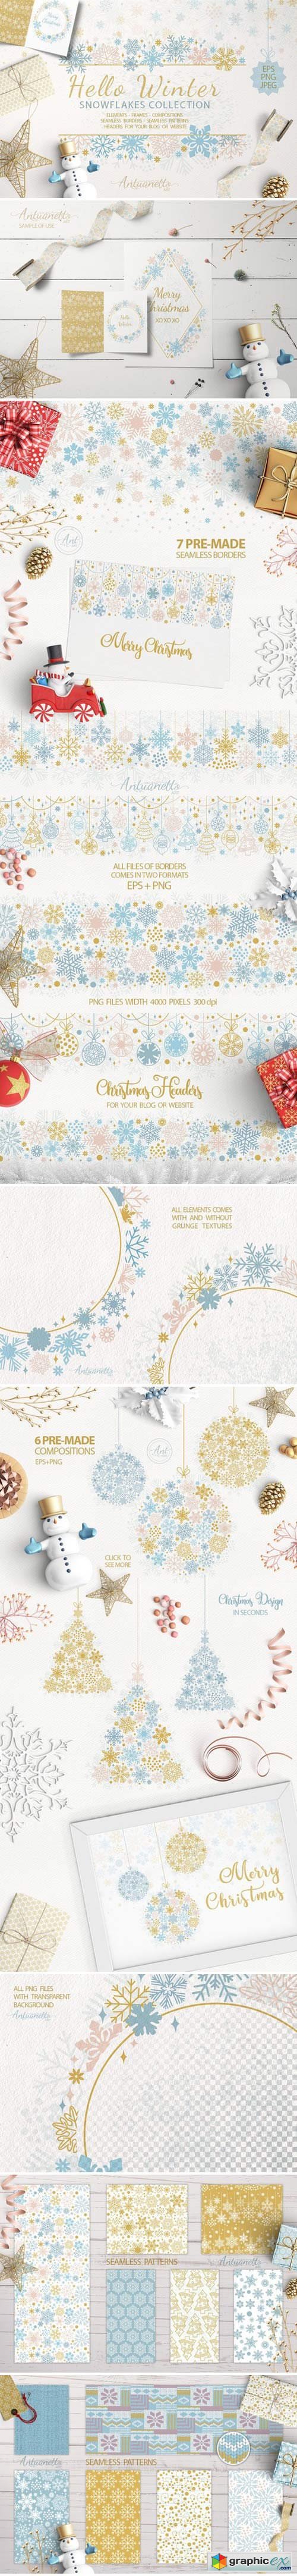 Sparkling snowflakes collection